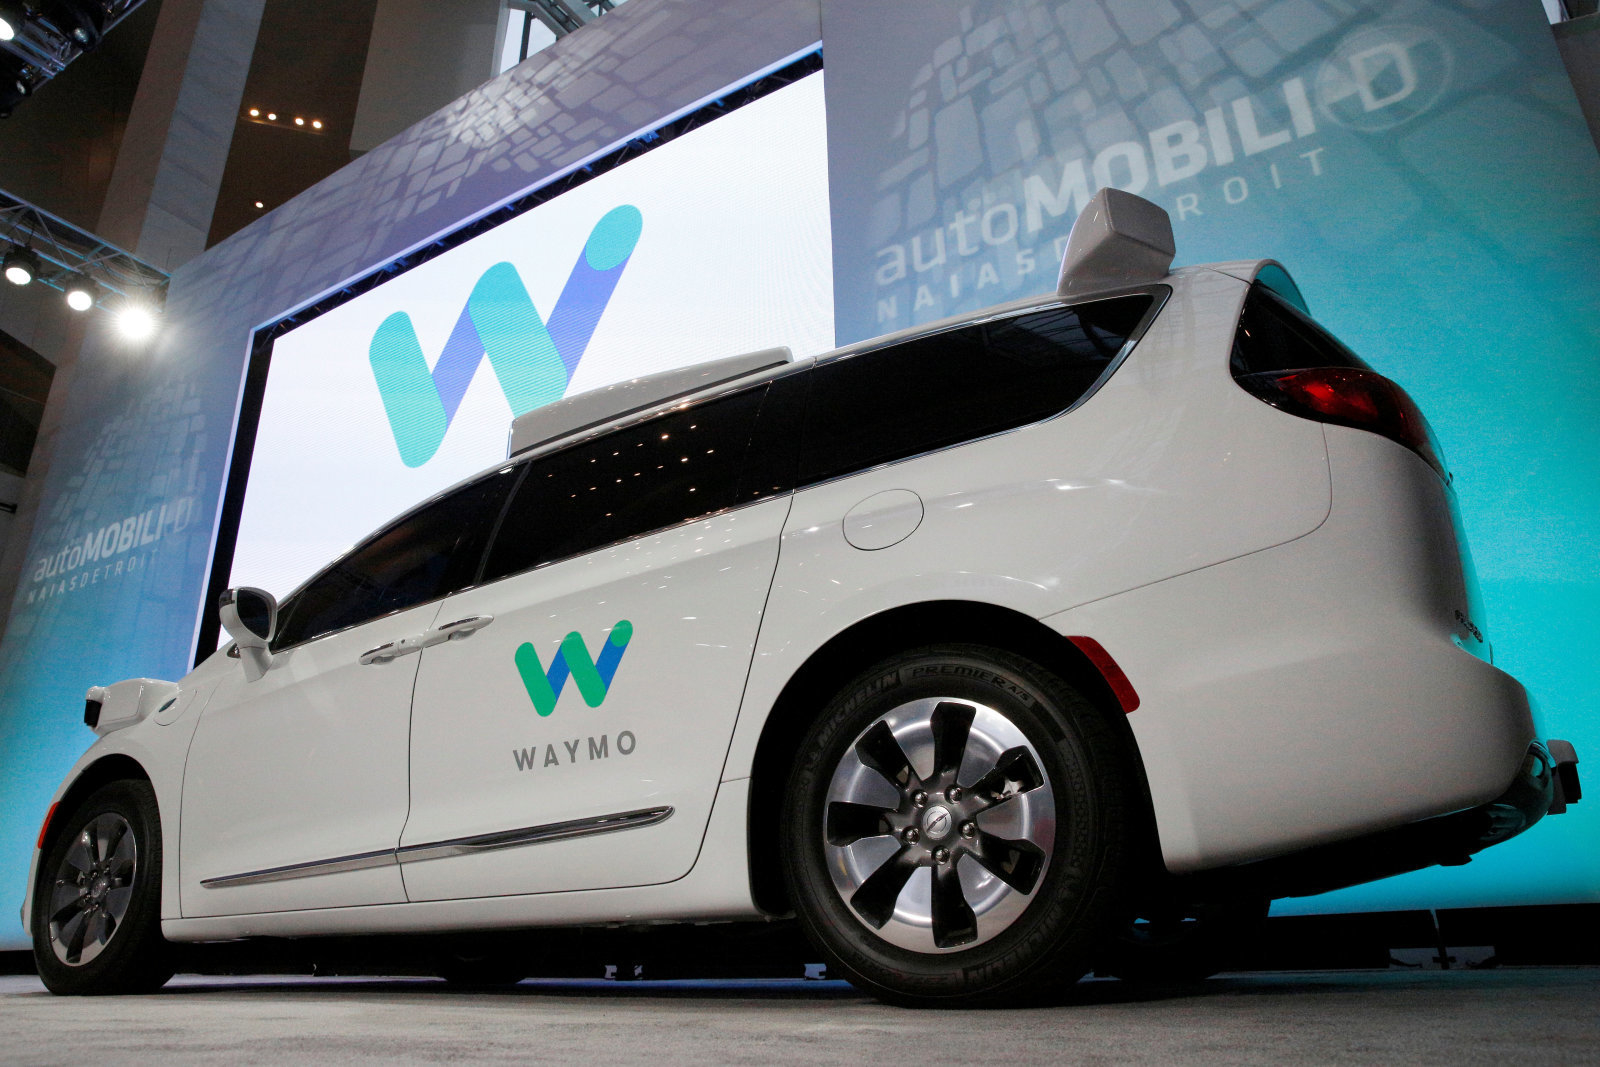 Waymo unveils a self-driving Chrysler Pacifica minivan during the North American International Auto Show in Detroit, Michigan, U.S., January 8, 2017.  REUTERS/Brendan McDermid